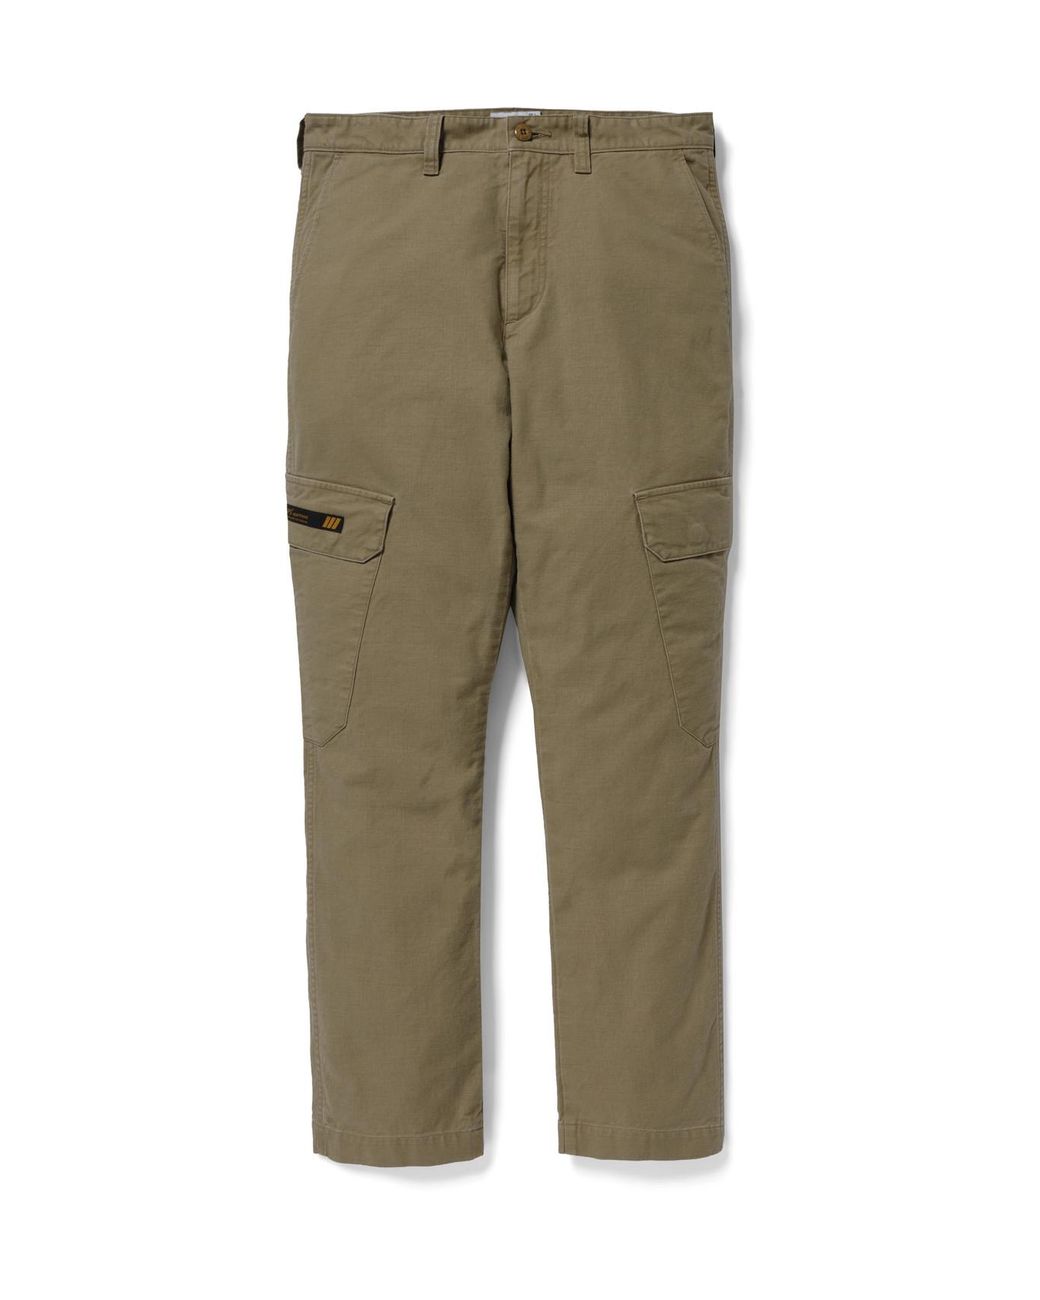 WTAPS Jungle Slim-fit Cotton-ripstop Cargo Trousers in Green for Men - Lyst